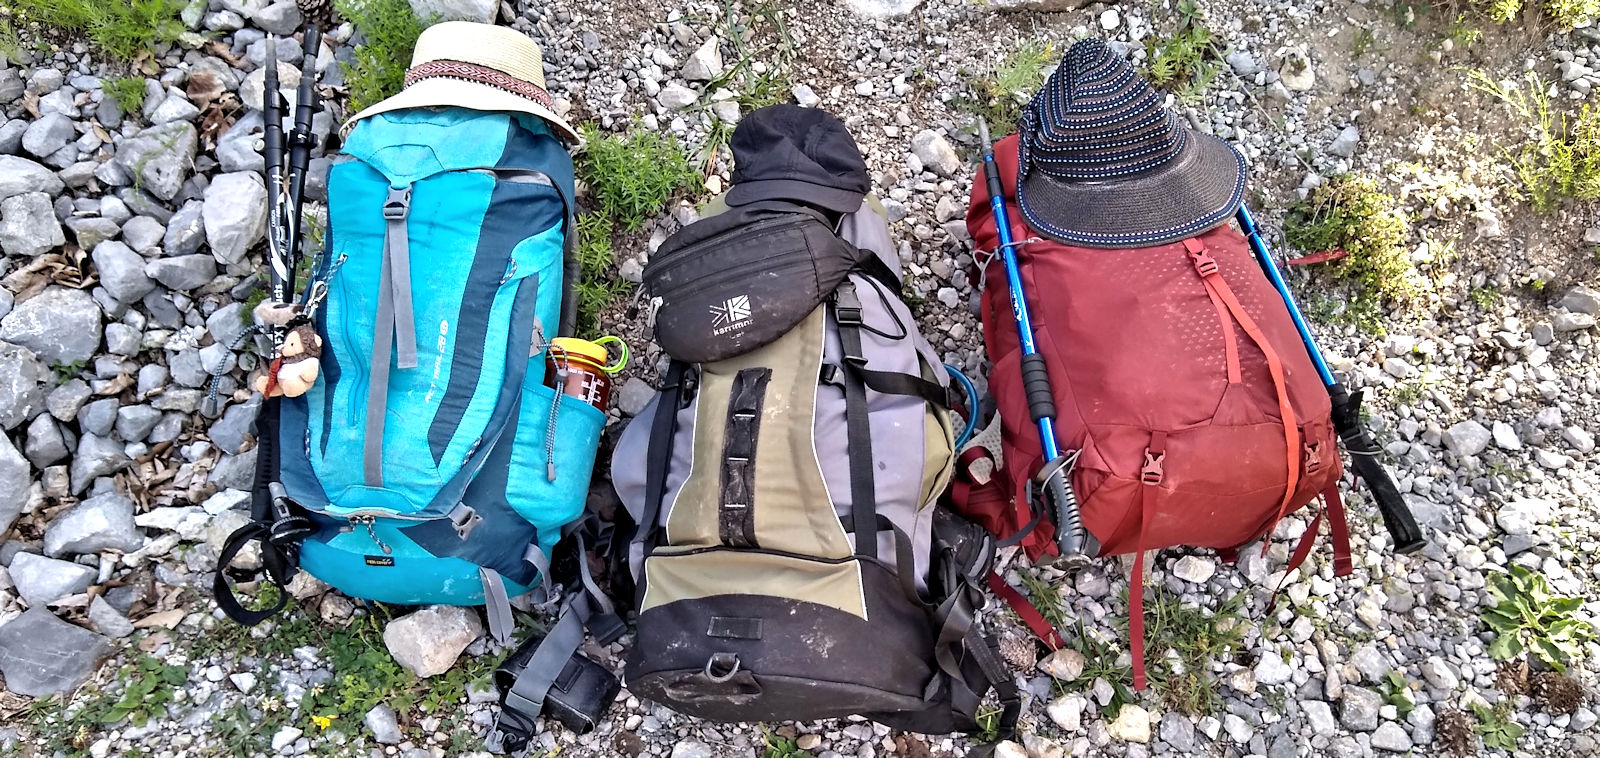 Three backpacks on the ground